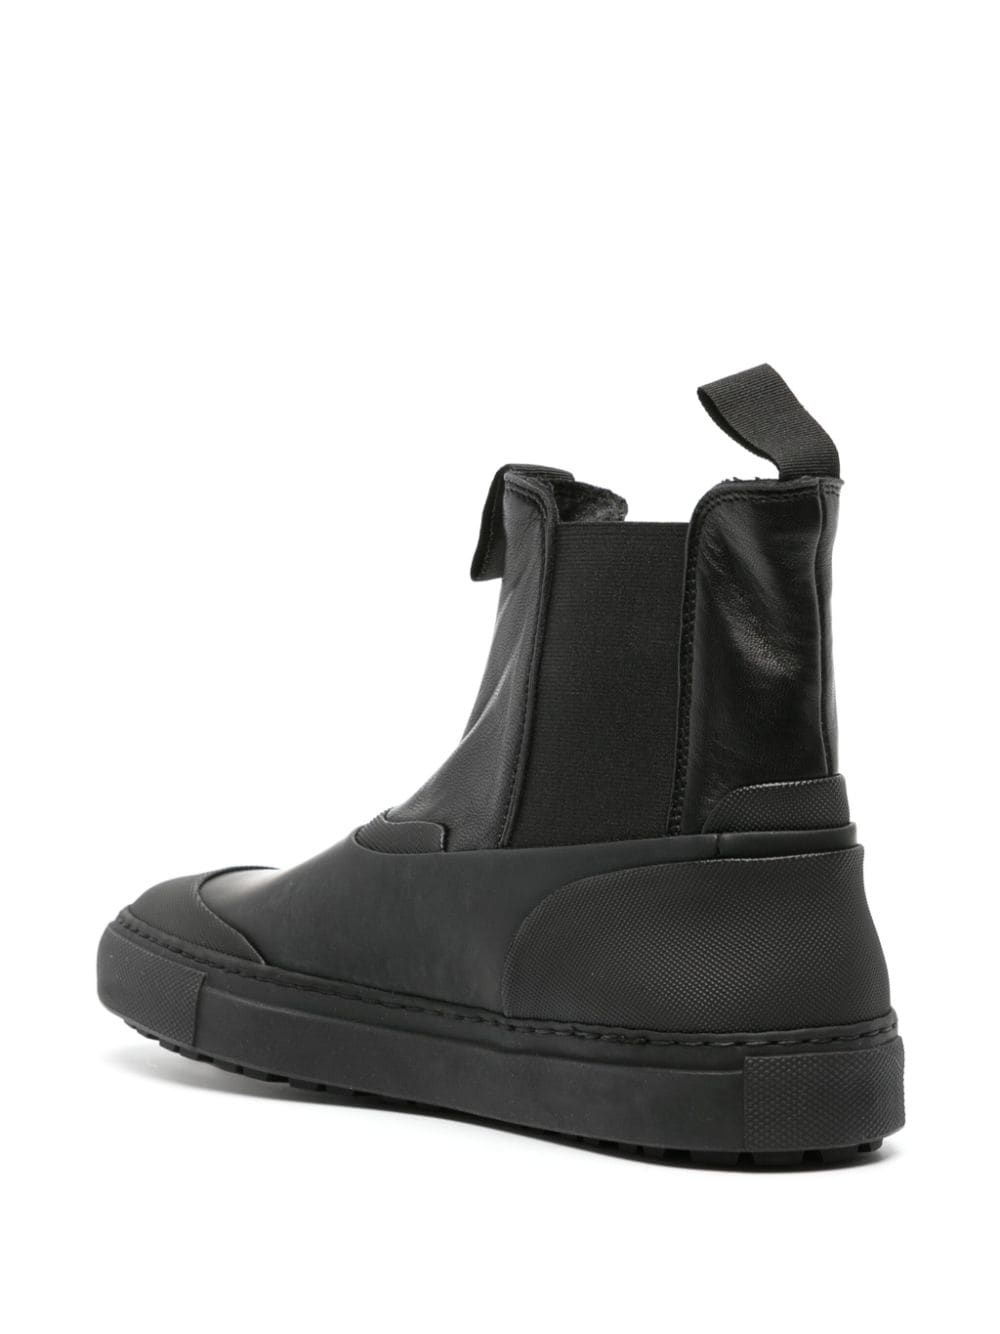 leather Chelsea boots - 3